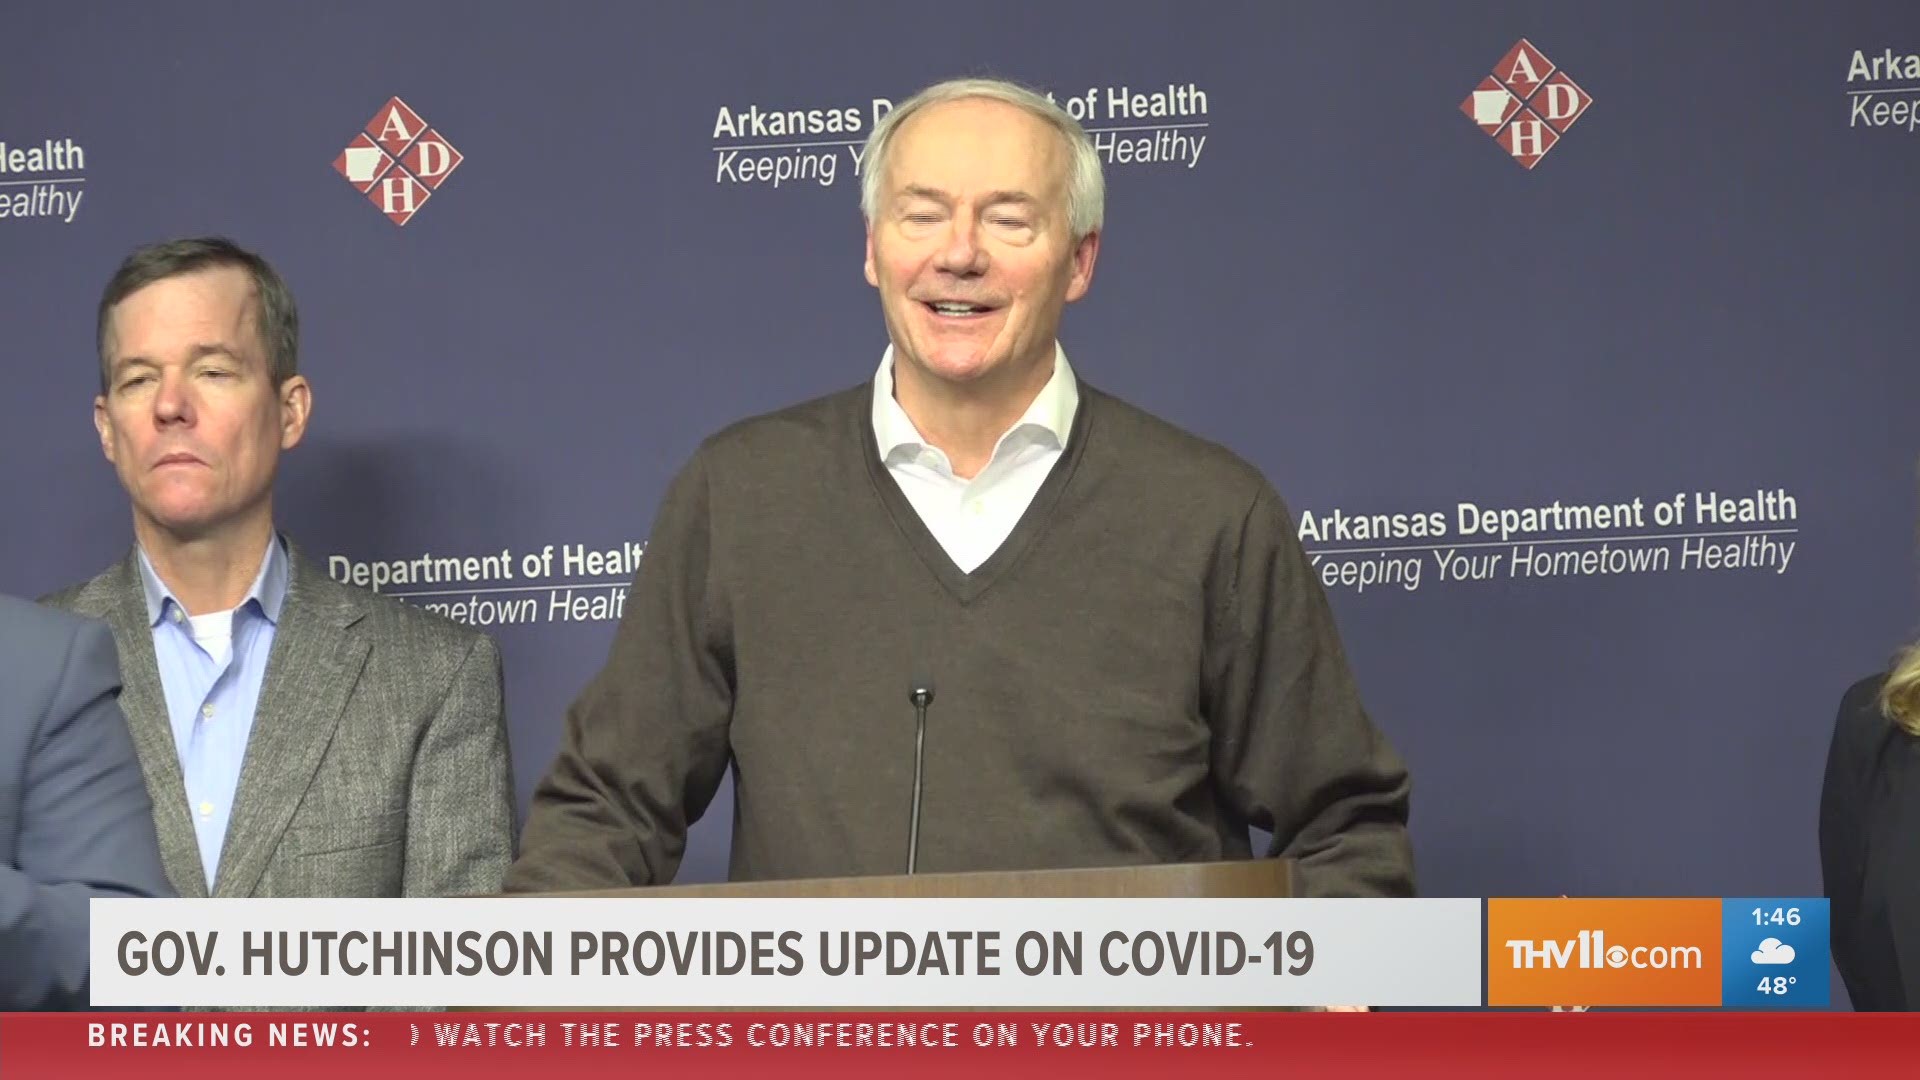 Gov. Hutchinson announced that all public schools in Arkansas will be closed starting on Tuesday and last until the end of Spring Break.